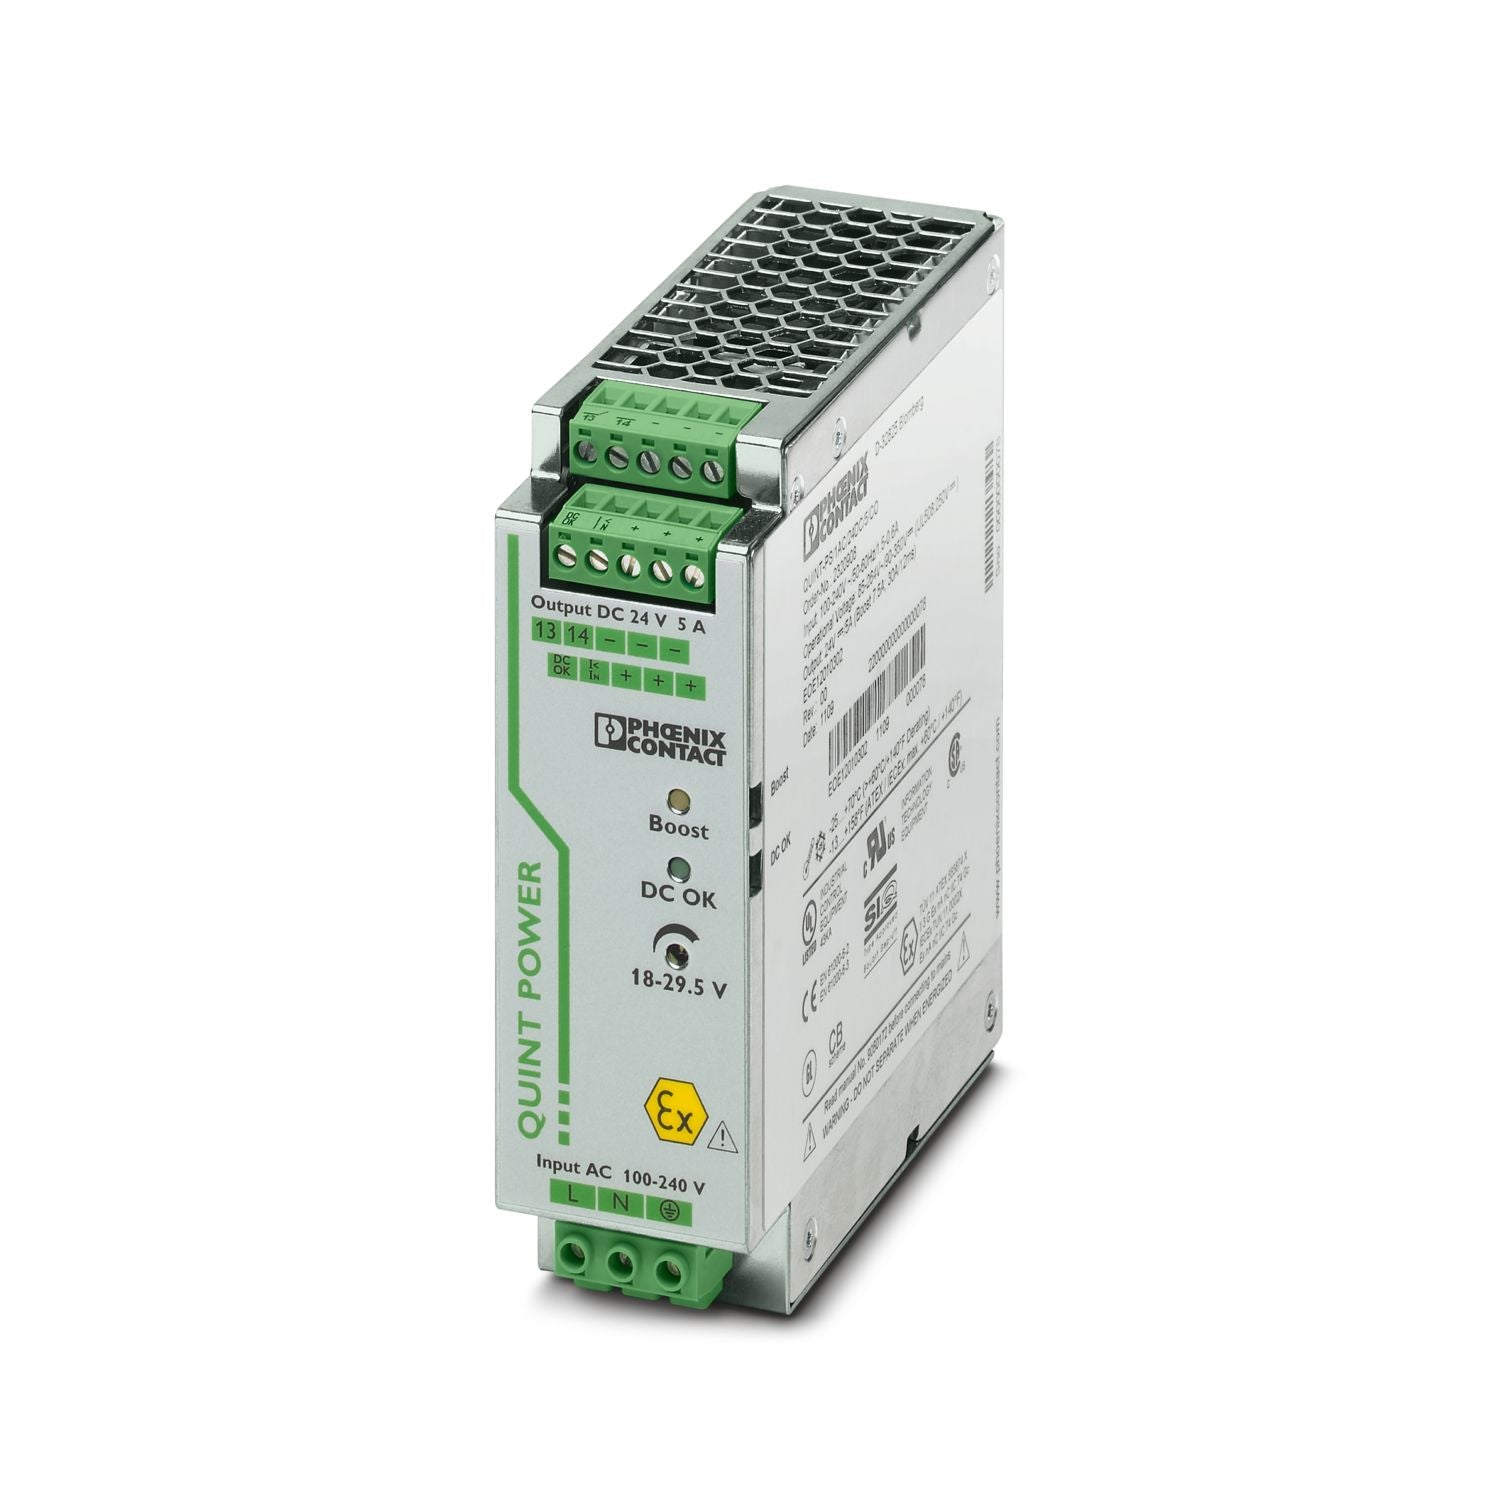 2320908 | Phoenix Contact | Power Supply, ACDC, 24VDC, 5A, 120W, DIN Rail Mount, QUINT POWER Series